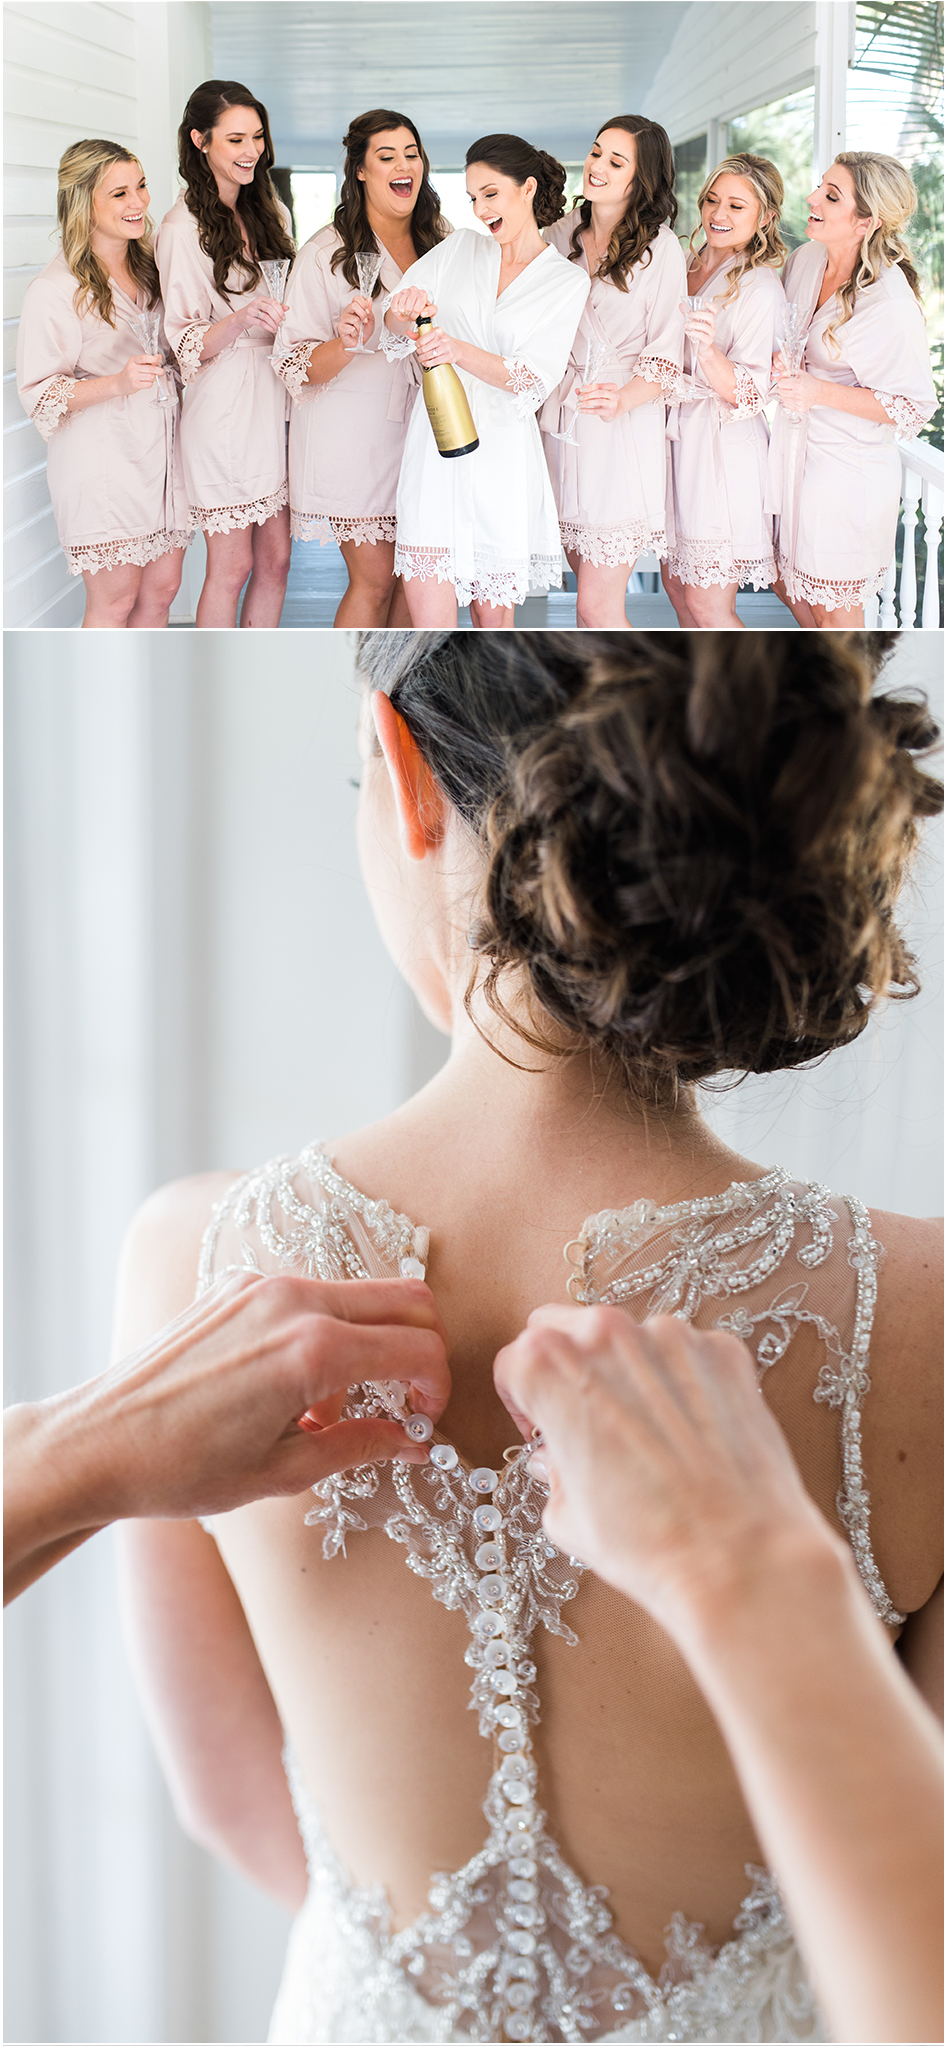 Brid and bridesmaids popping champagne | Up the Creek Farms Wedding | Lisa Marshall Photography